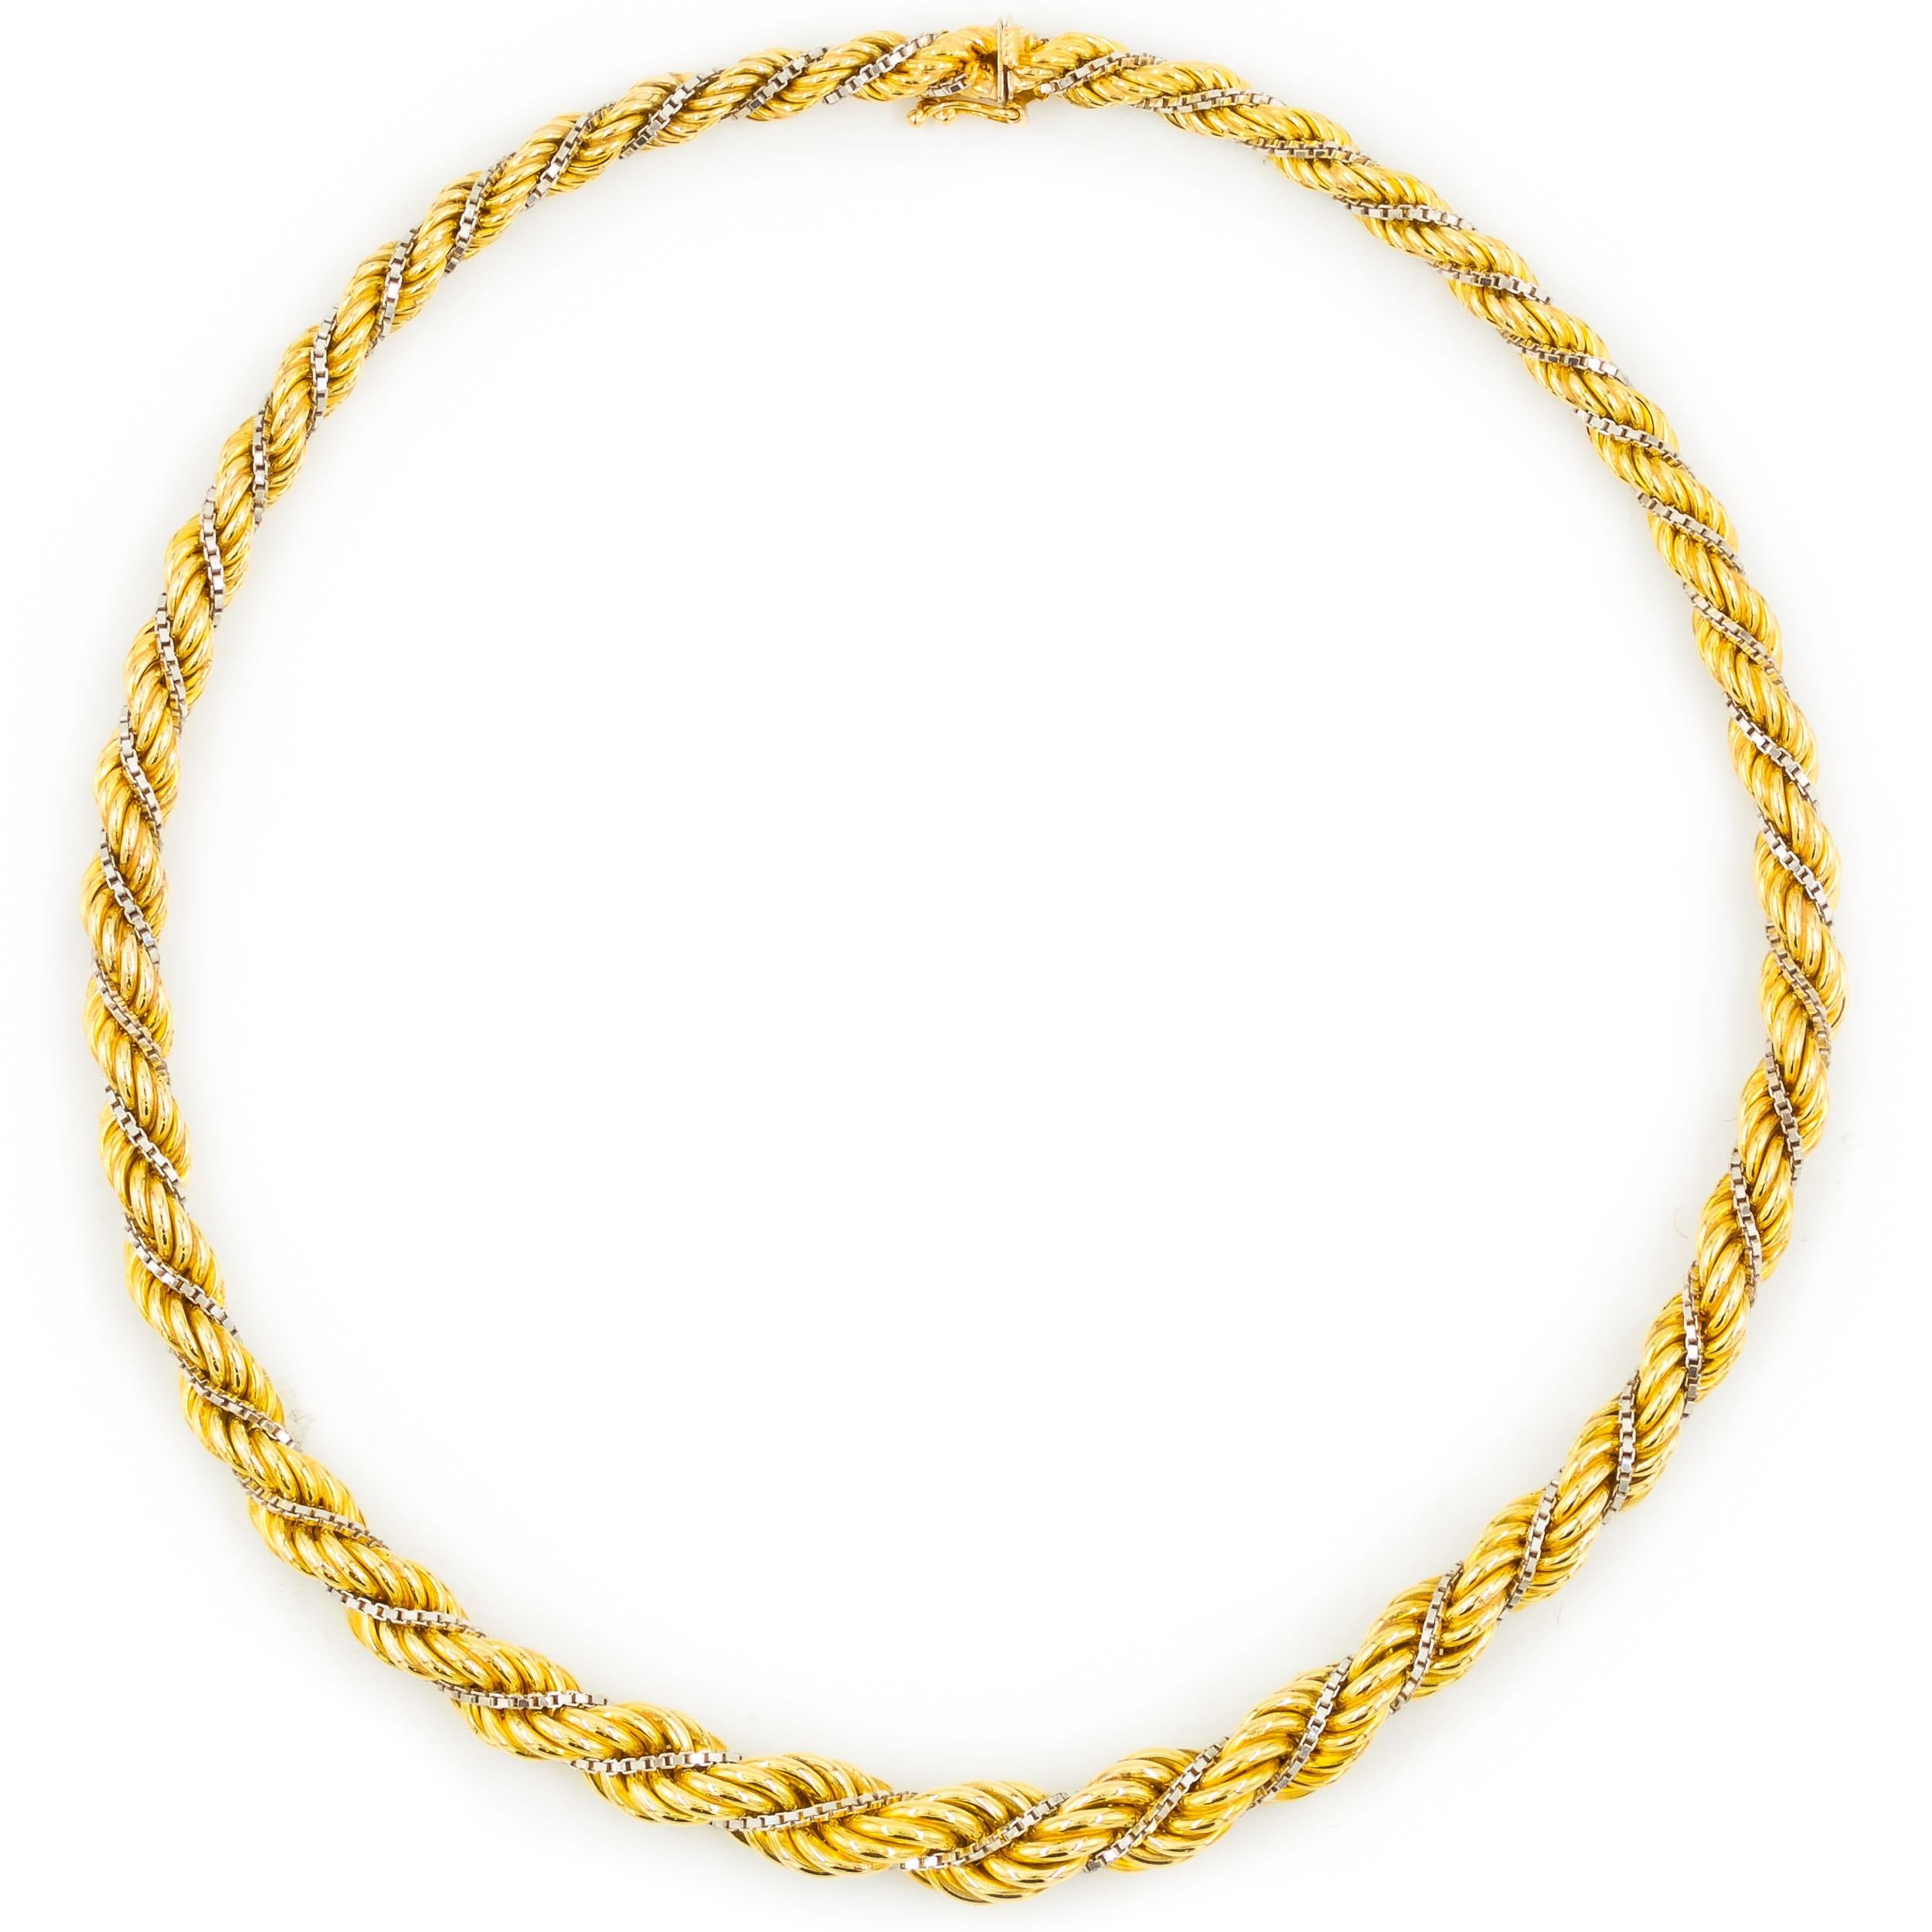 VINTAGE GOLD GRADUATED-TWIST ROPE NECKLACE
18k yellow gold with 14k white gold inner chain  44.3 grams total weight  17 3/8